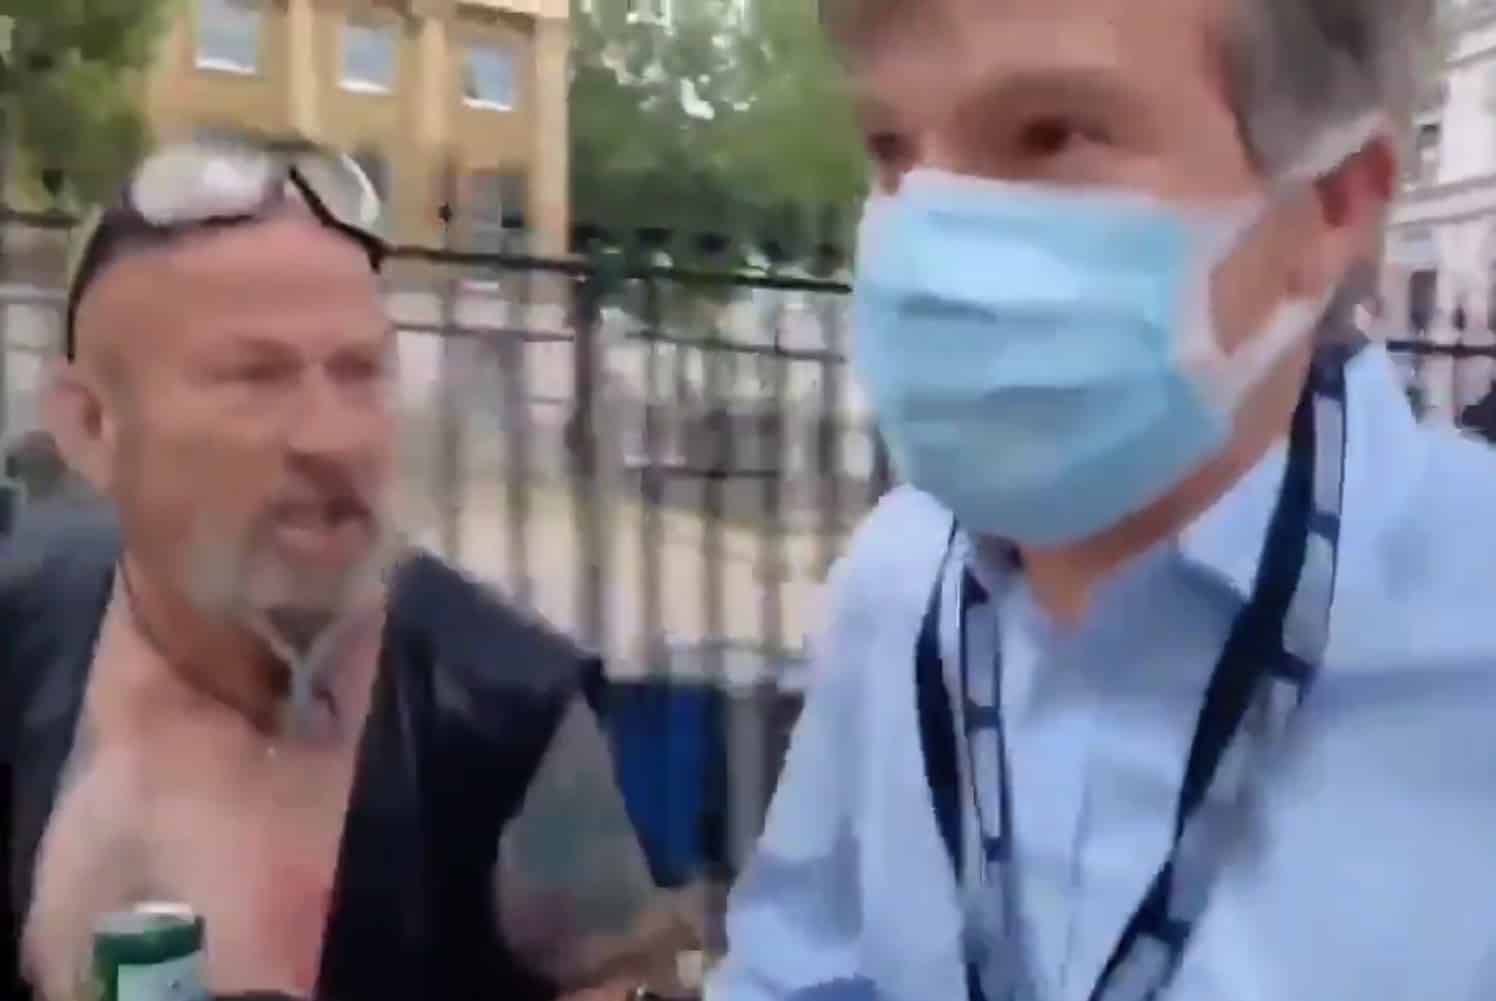 Disgusting: Newsnight presenter harassed by anti-lockdown protesters outside Downing Street